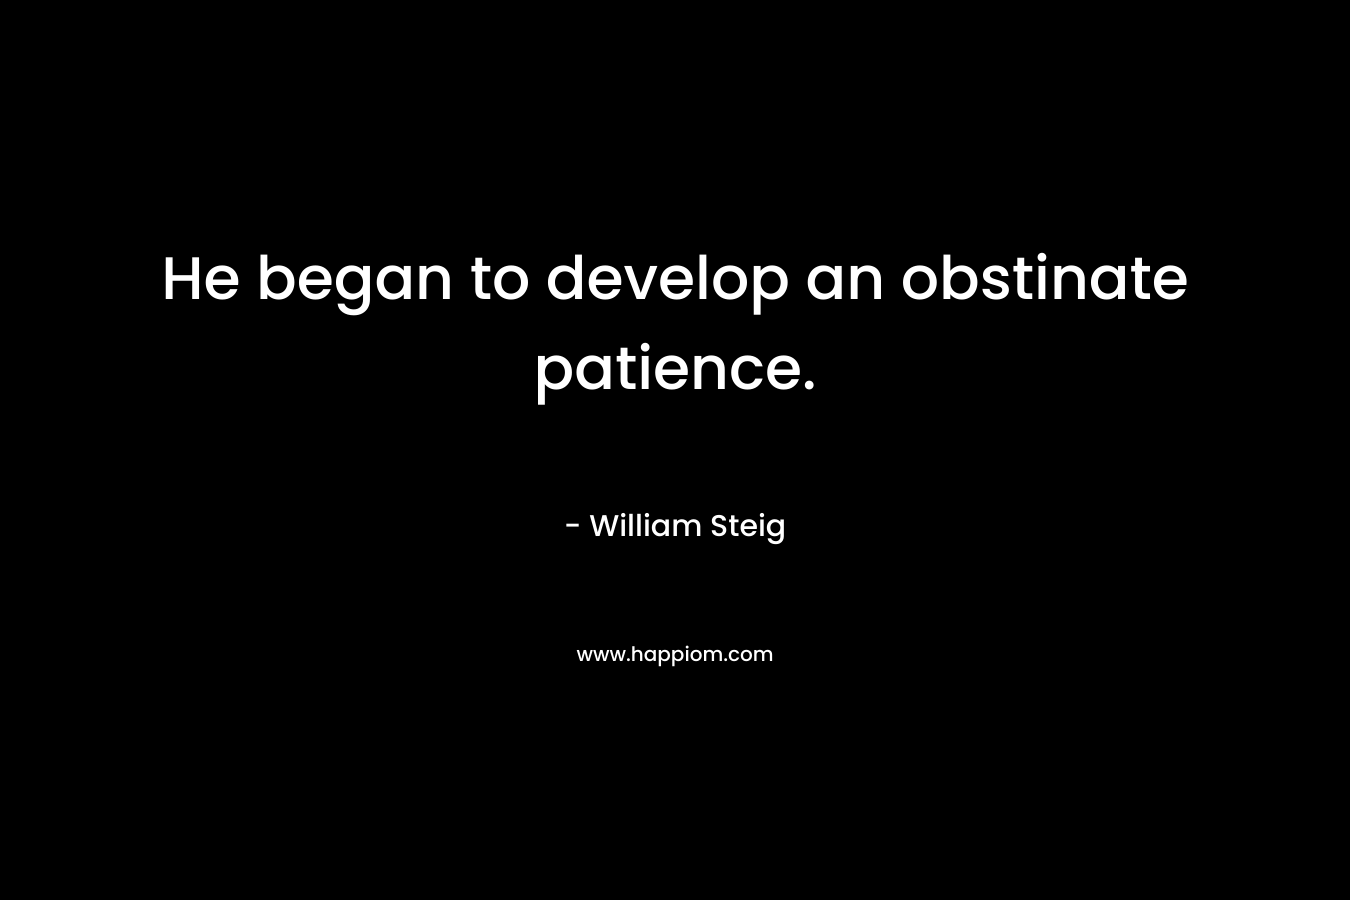 He began to develop an obstinate patience.